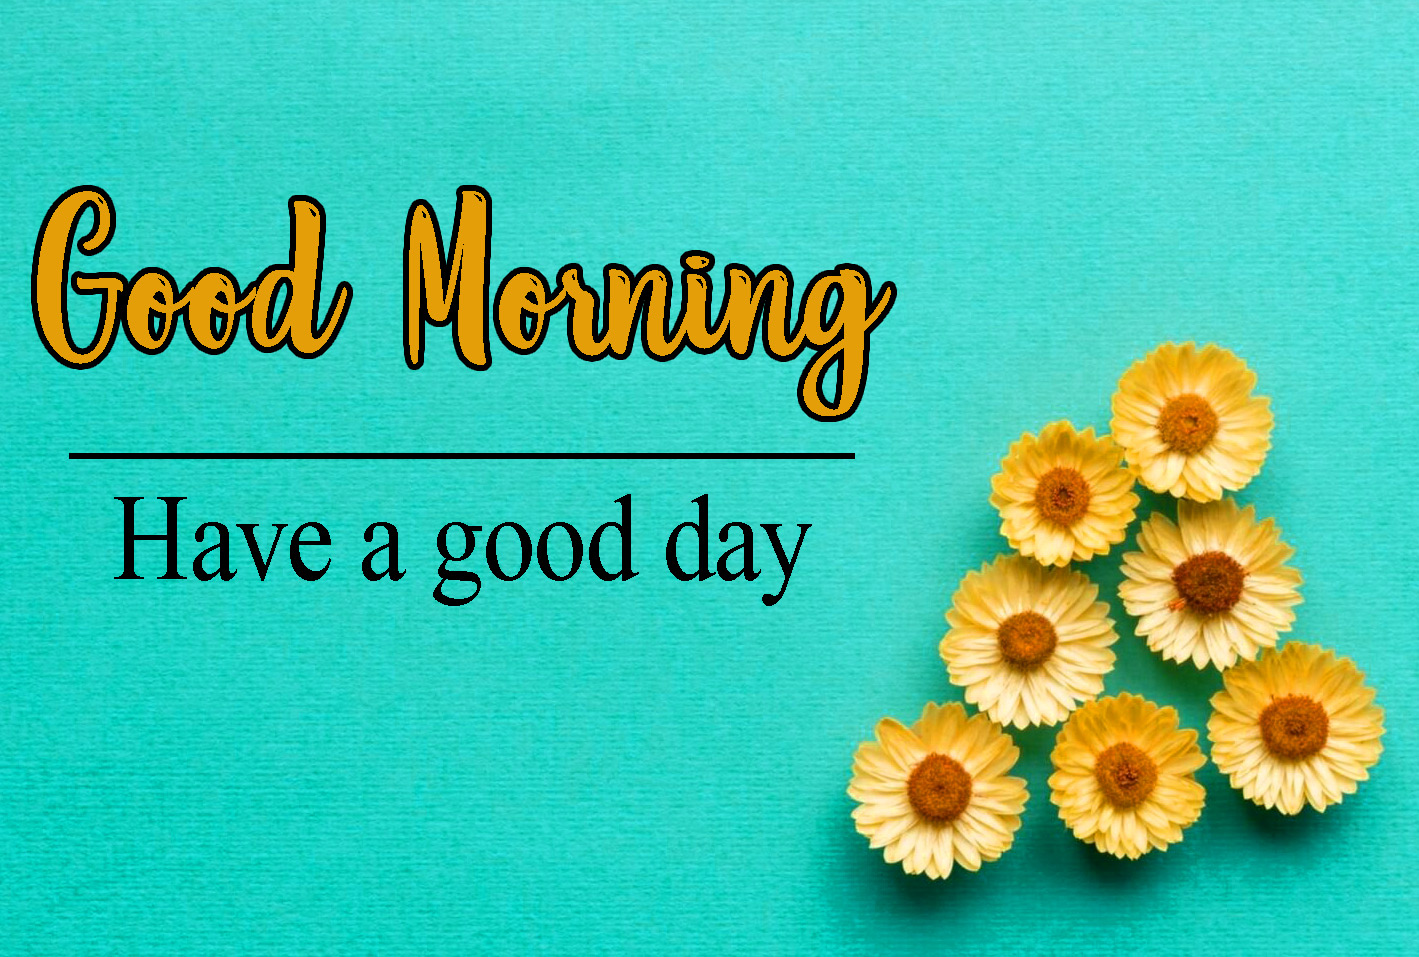 Good Morning Wallpaper Pictures Download 